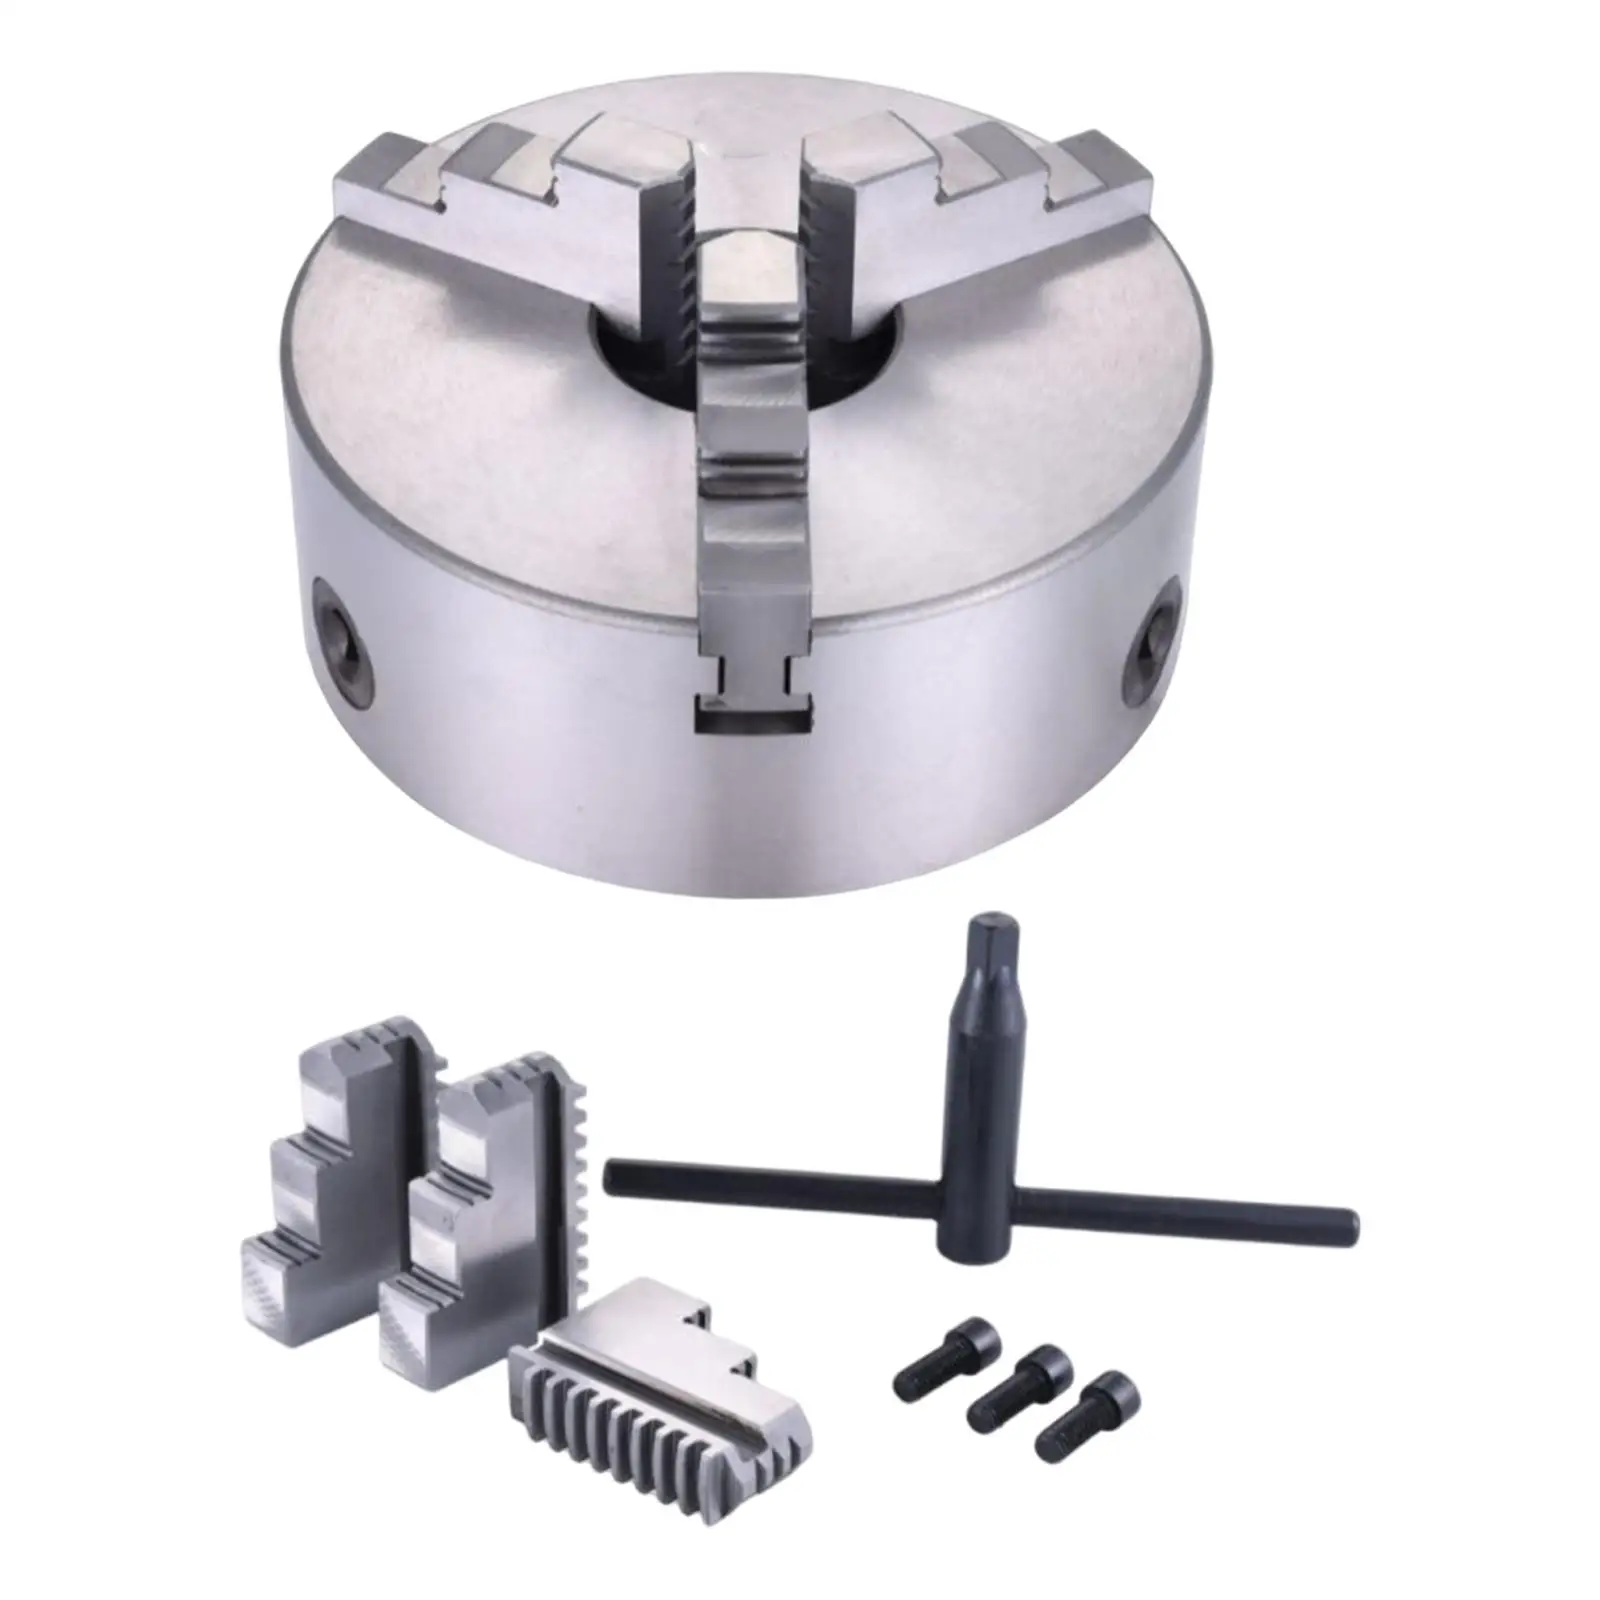 4 Inch/ 100 Mm Lathe Chuck 3 Jaw , Fast Clamping  High Adaptability